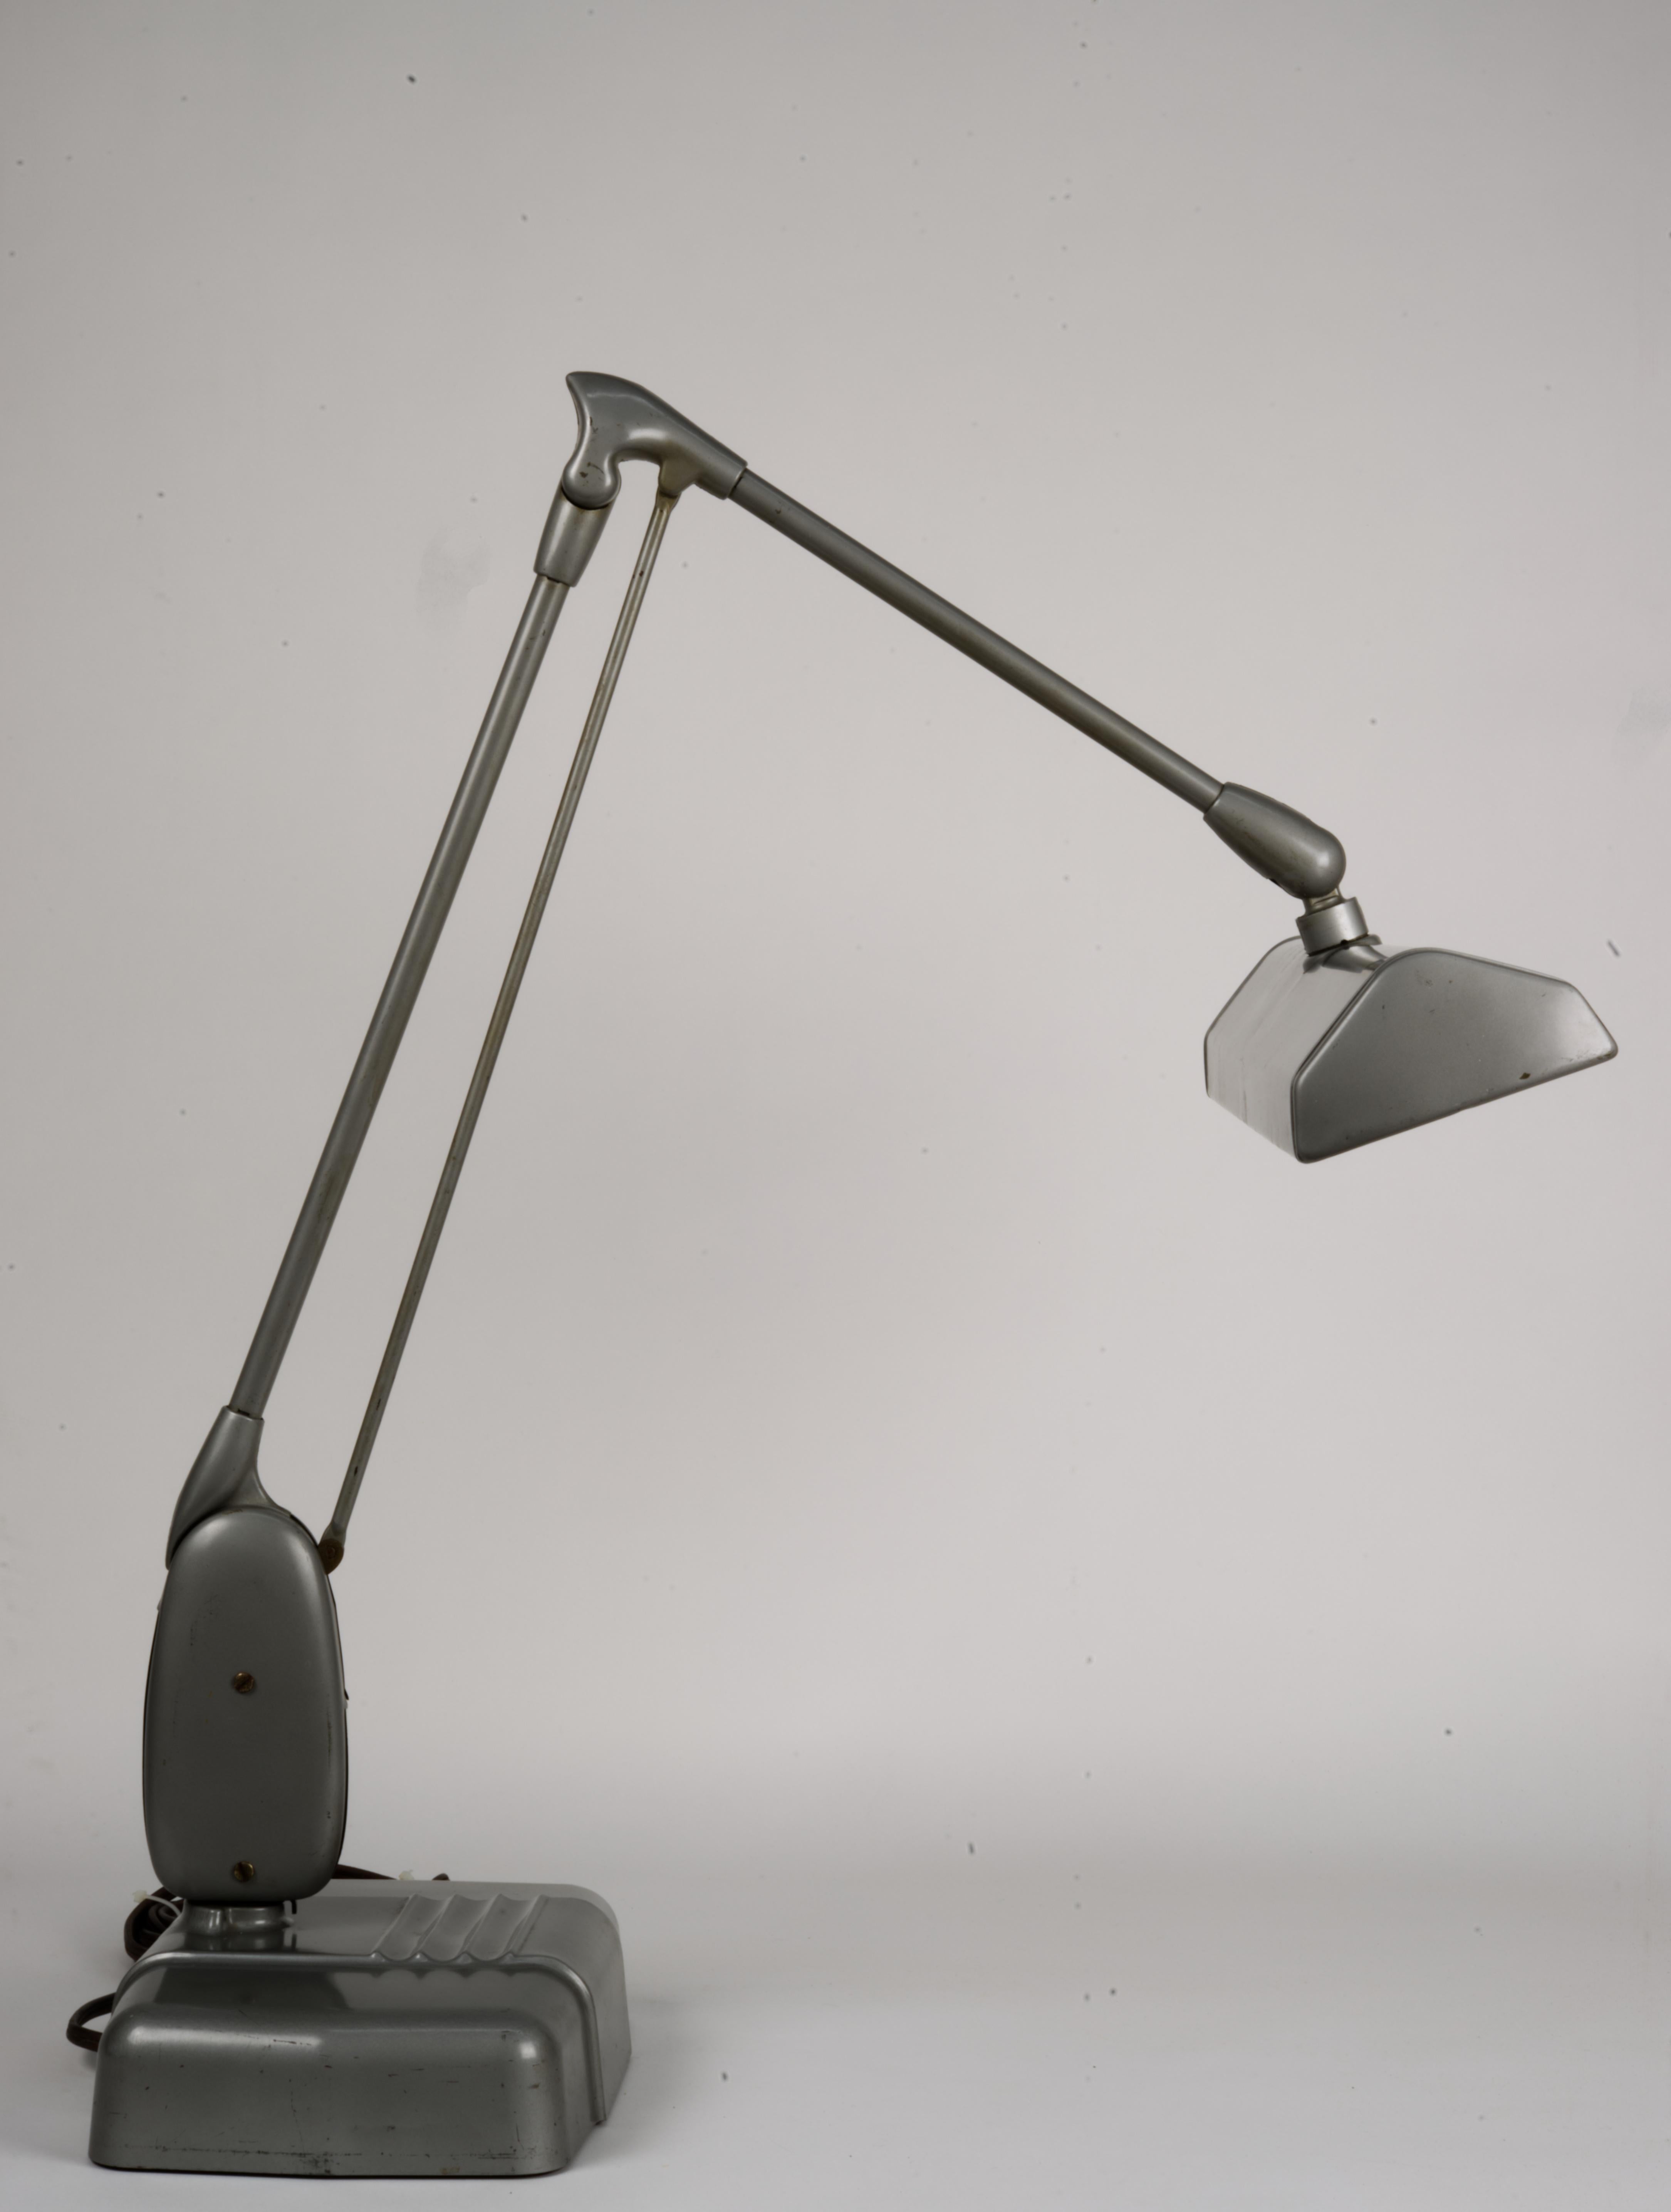 This is a famous floating arm lamp by Dazor. Company was founded in 1938 and made itself the name on this design for it's durability, ease of adjustment and most importantly, for strong an even light quality. Lamp was often used by the diamond